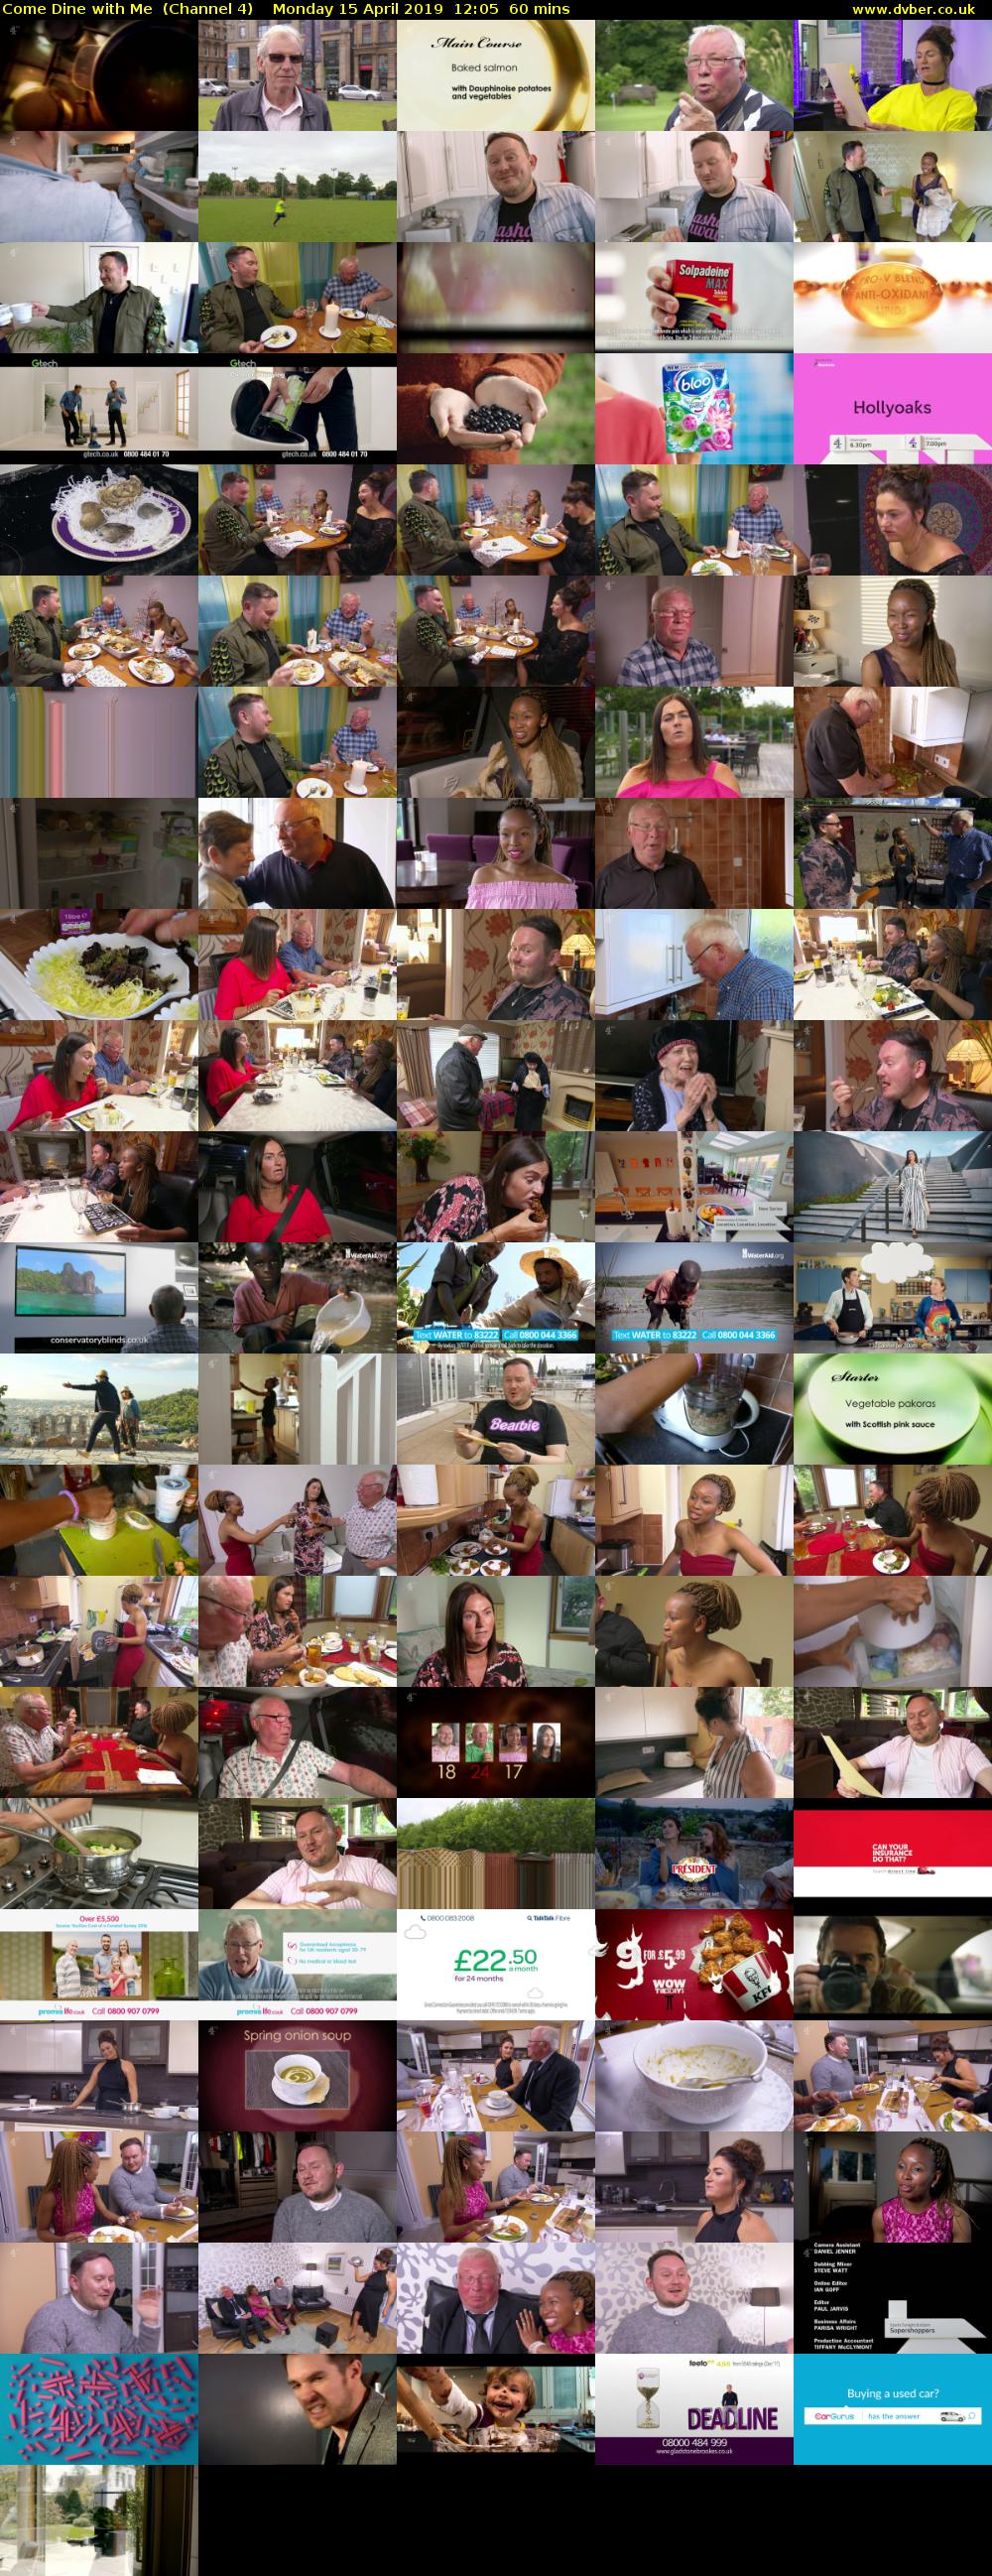 Come Dine with Me  (Channel 4) Monday 15 April 2019 12:05 - 13:05